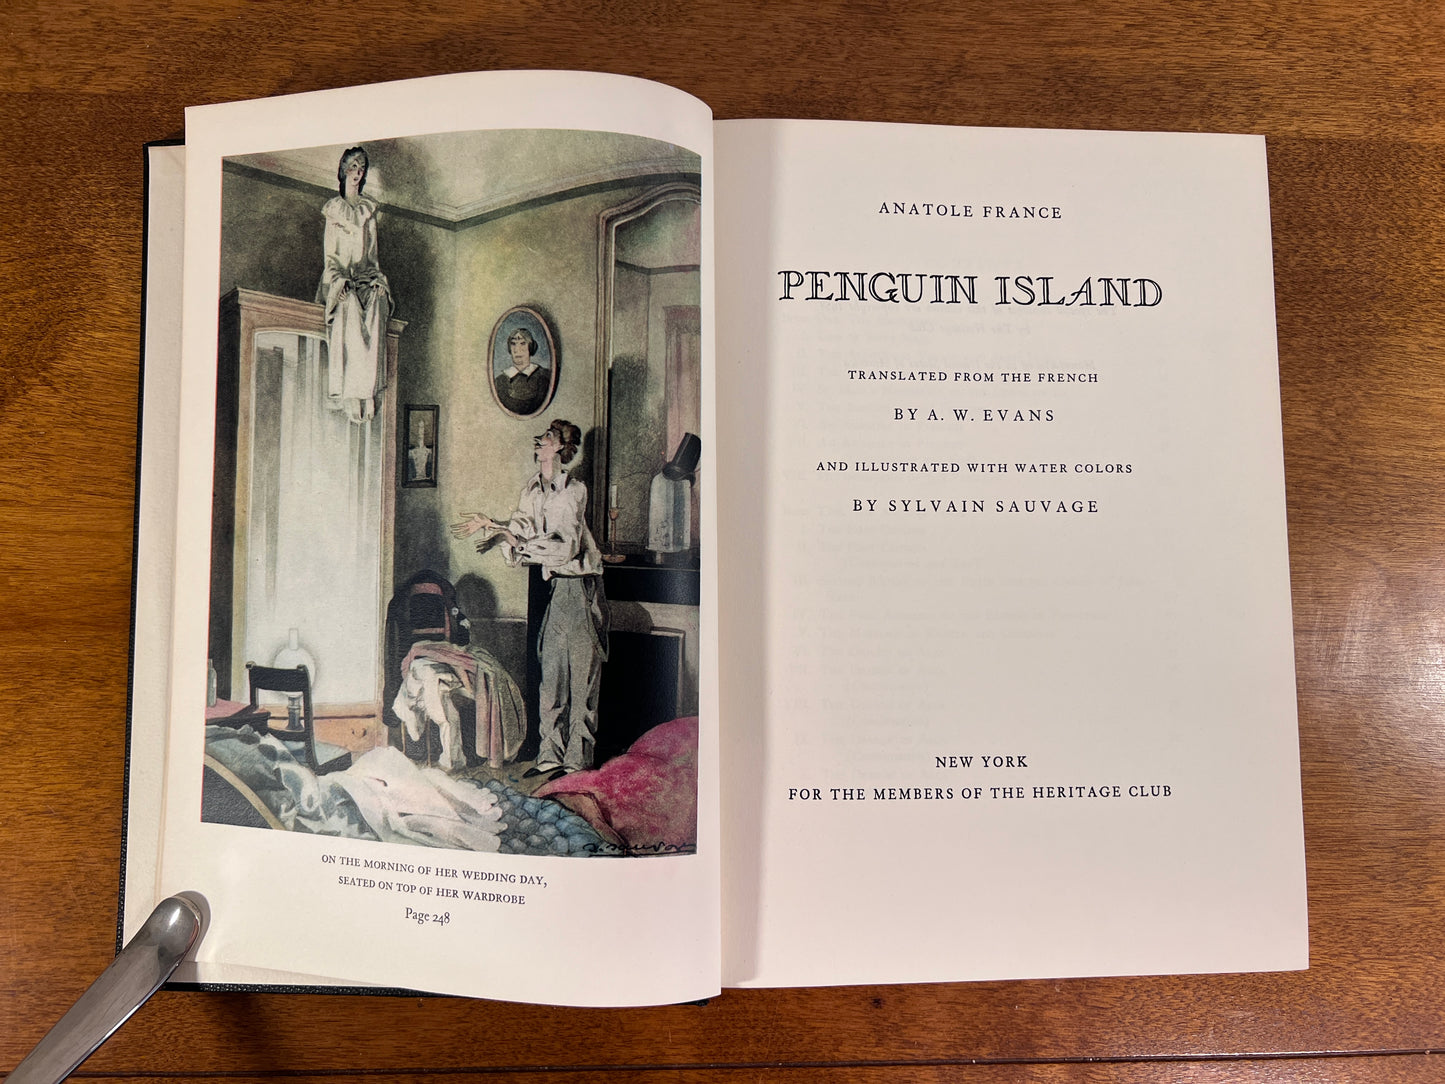 Penguin Island by A.W. Evans Illustrated by Sylvain Sauvage, 1938